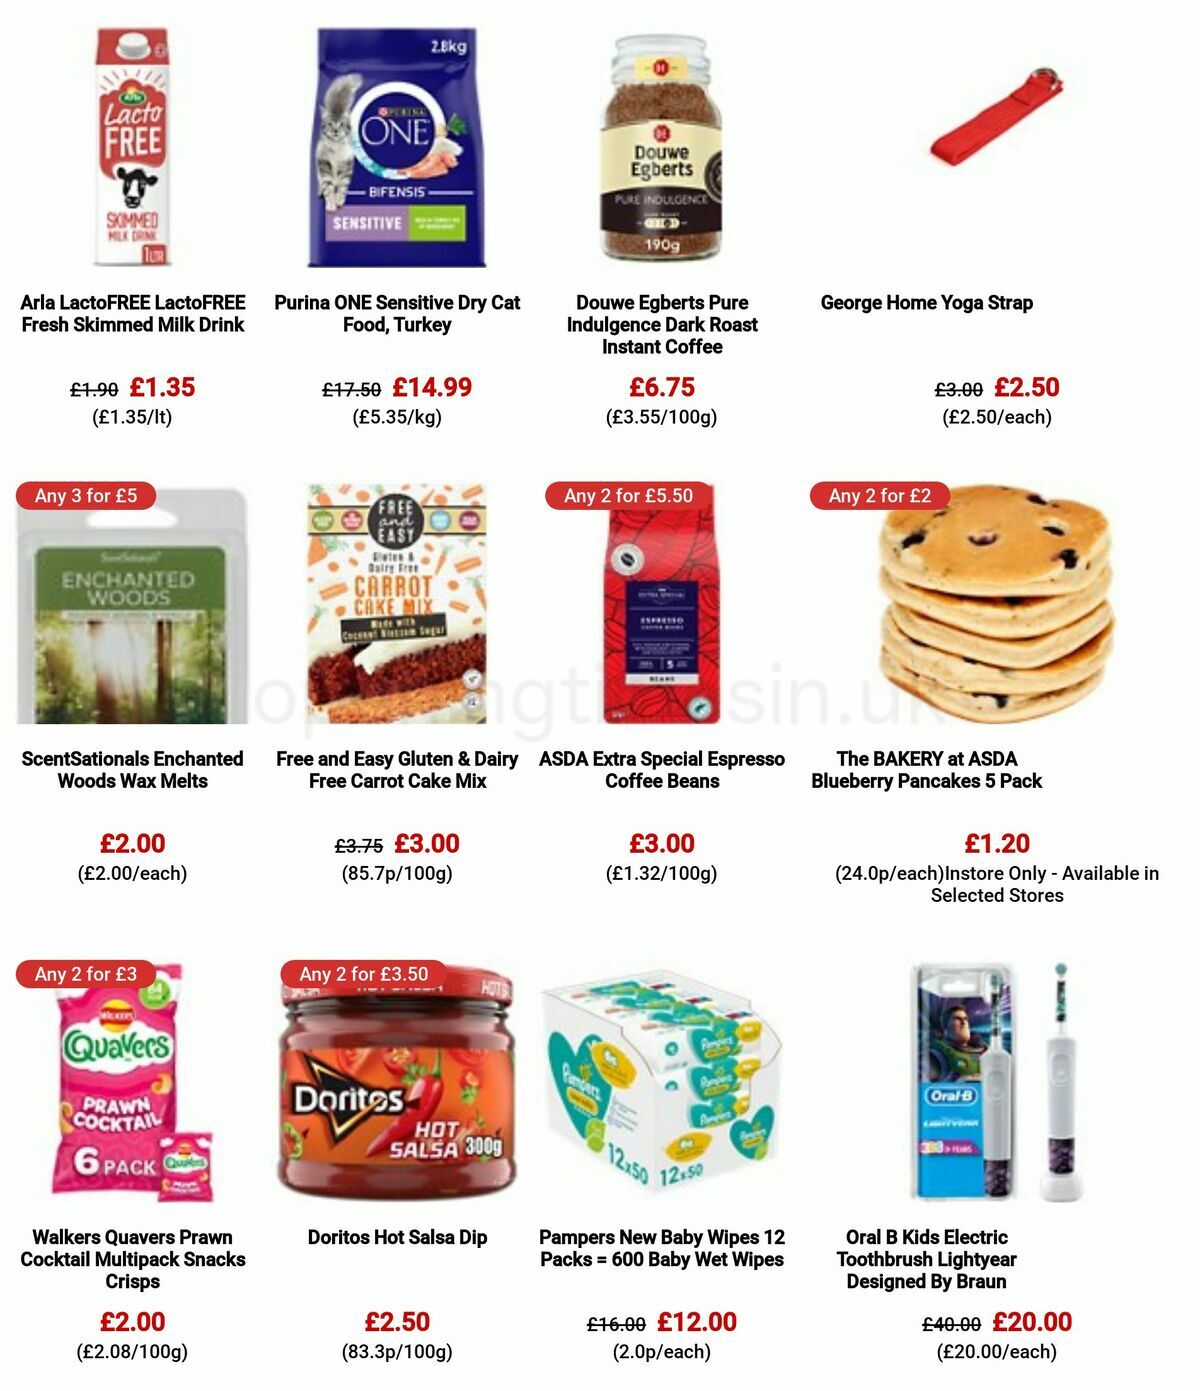 ASDA Offers from 16 June